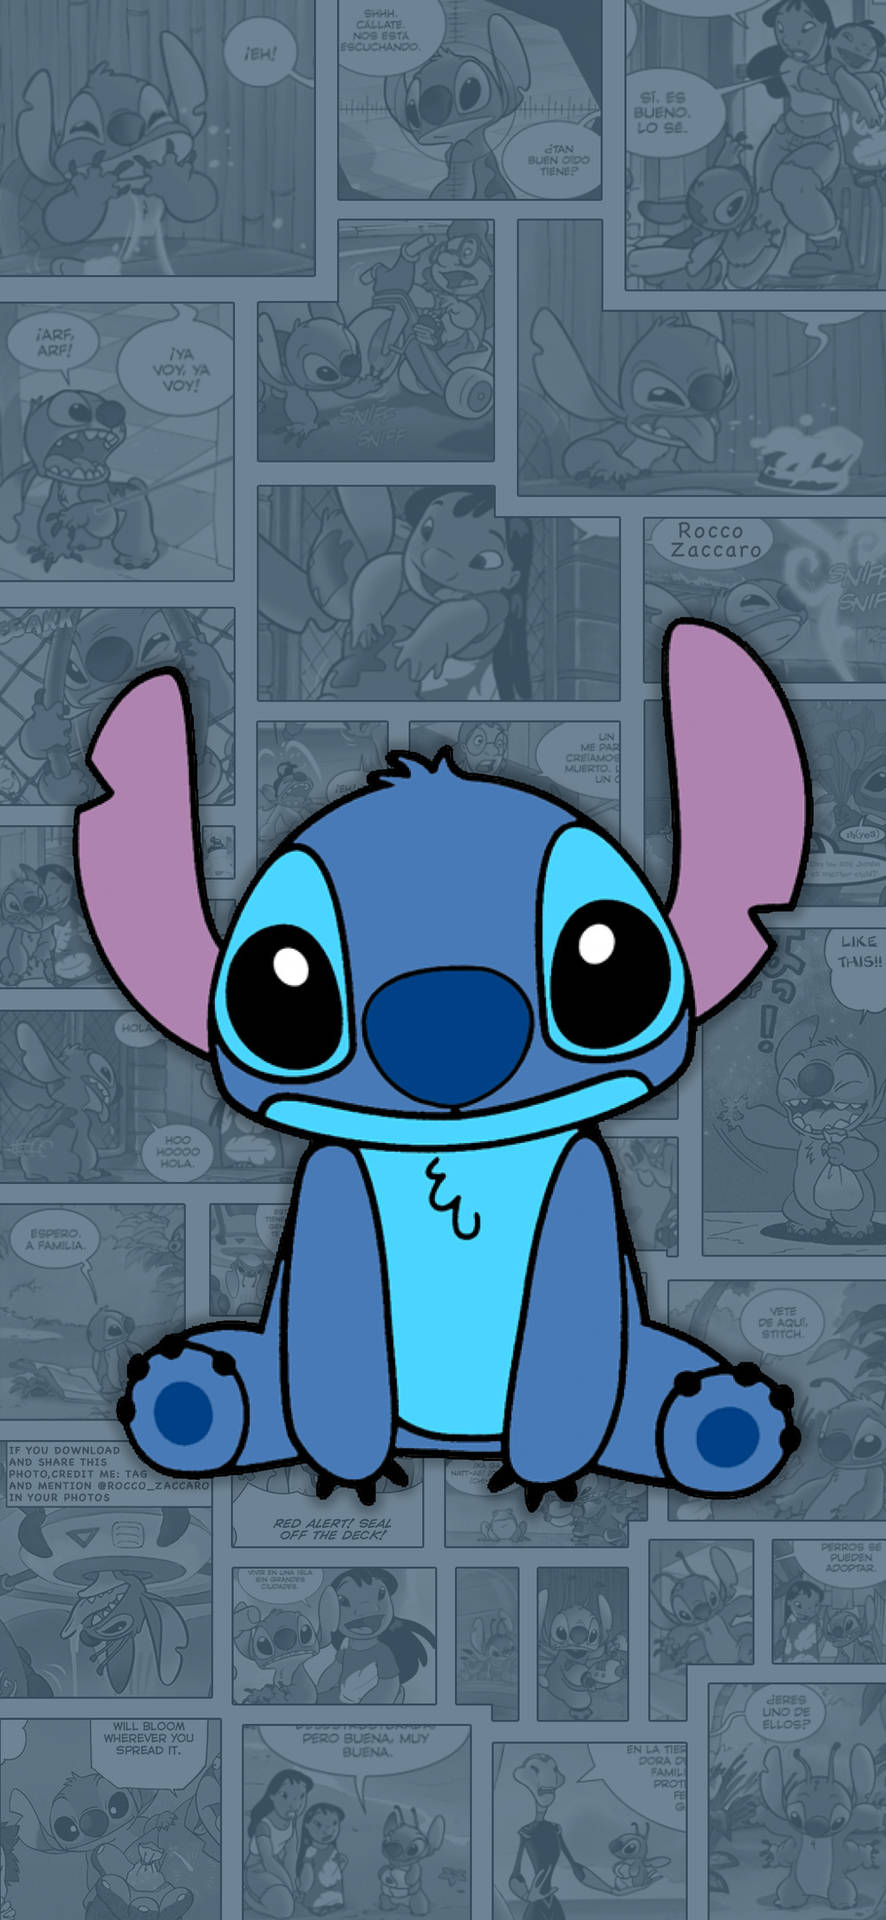 Wallpaper of Stitch in a digital art drawing amid a transparent collage of Lilo and Stitch comics.